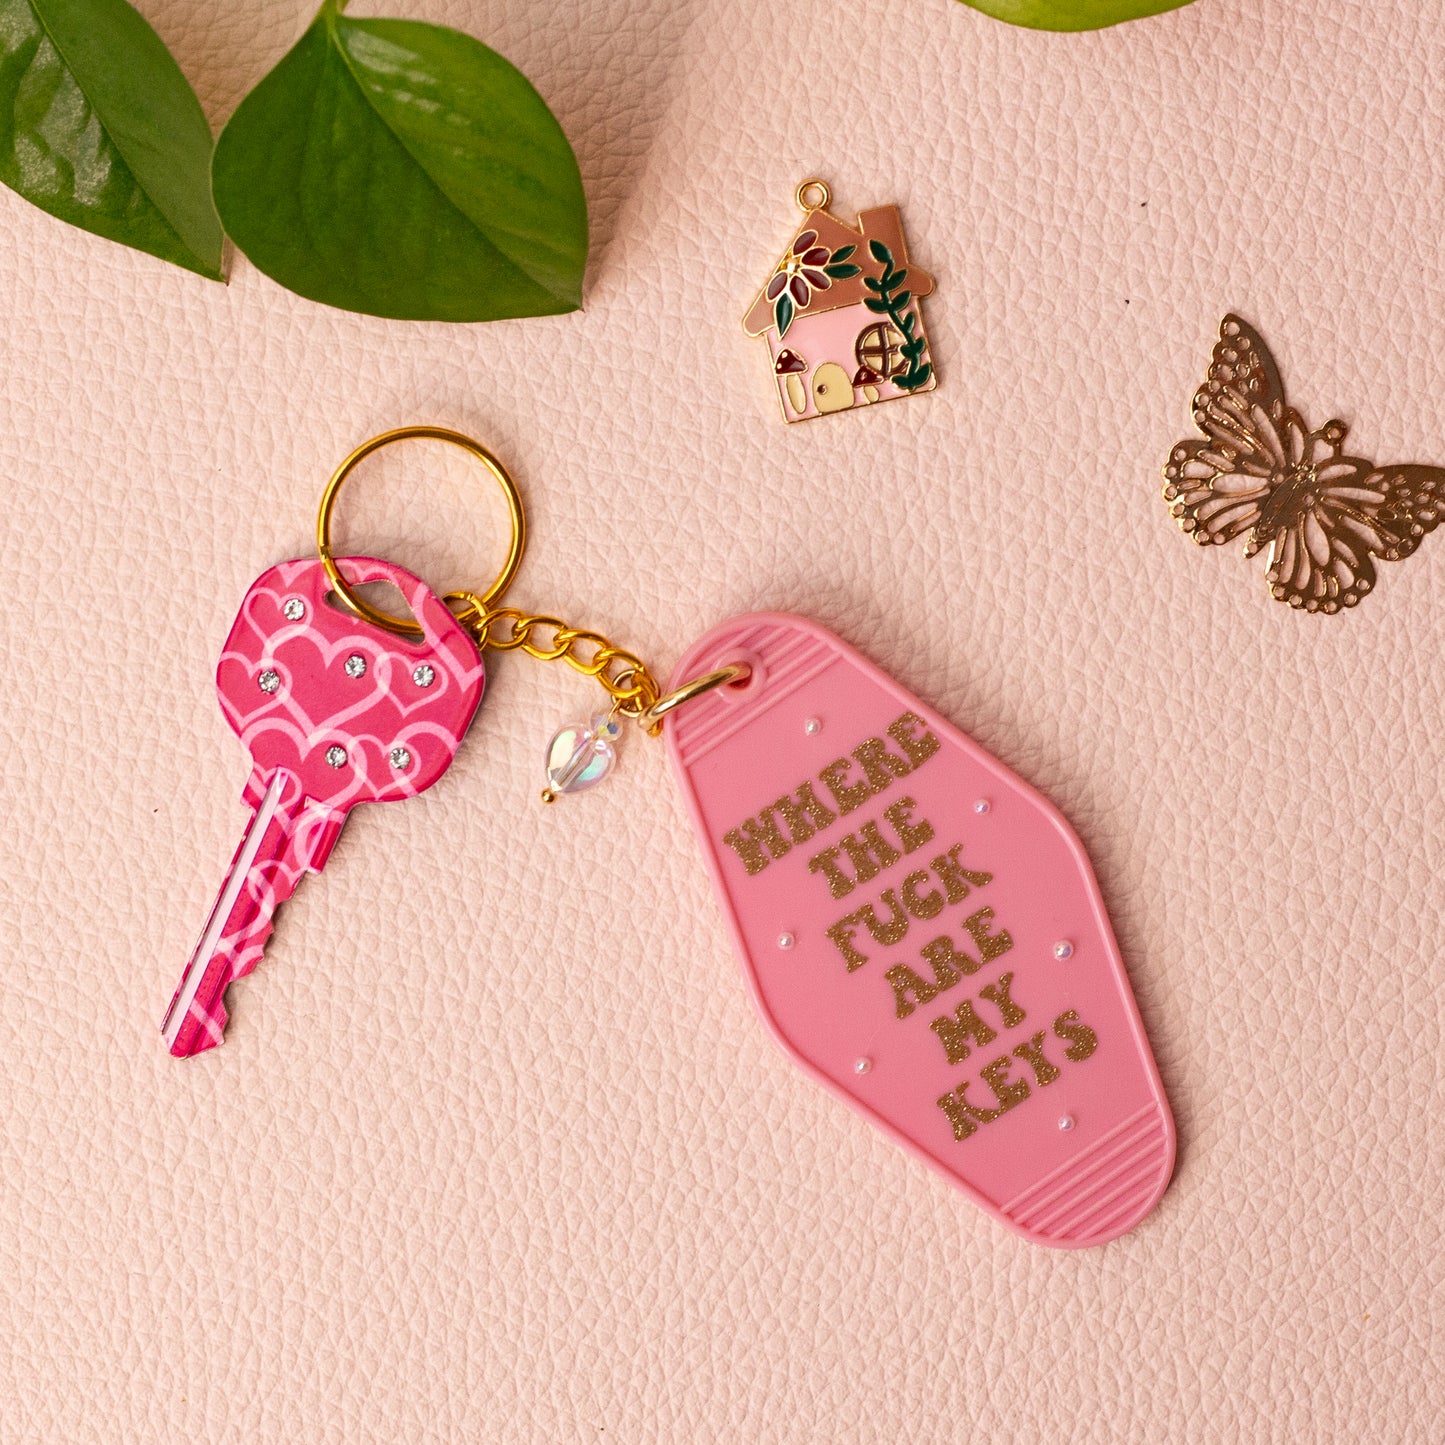 🌼 'Where Are My Keys?' Keychain with Heart Charm